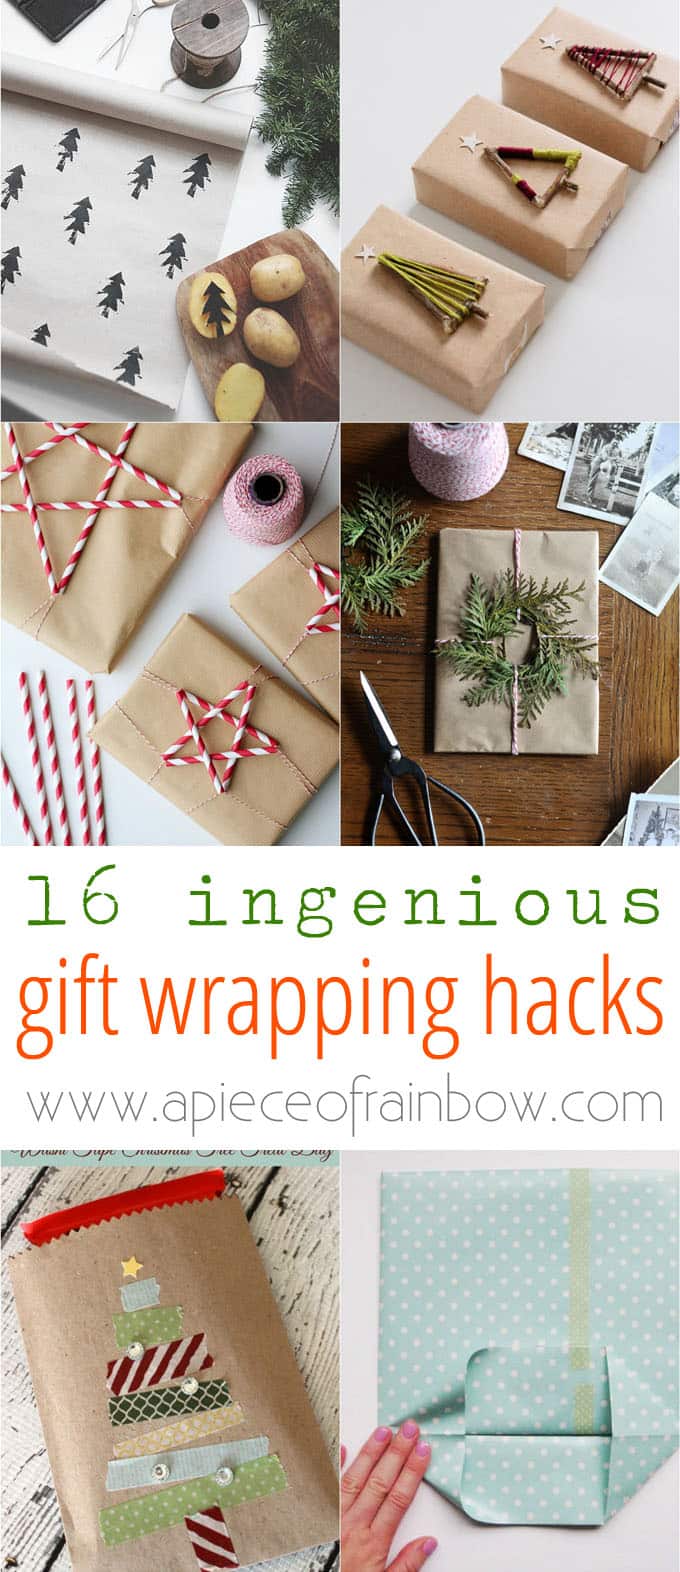 16 Christmas gift wrapping ideas & best hacks on how to make beautiful free gift wraps & easy gift bags in minutes with up-cycled materials! 